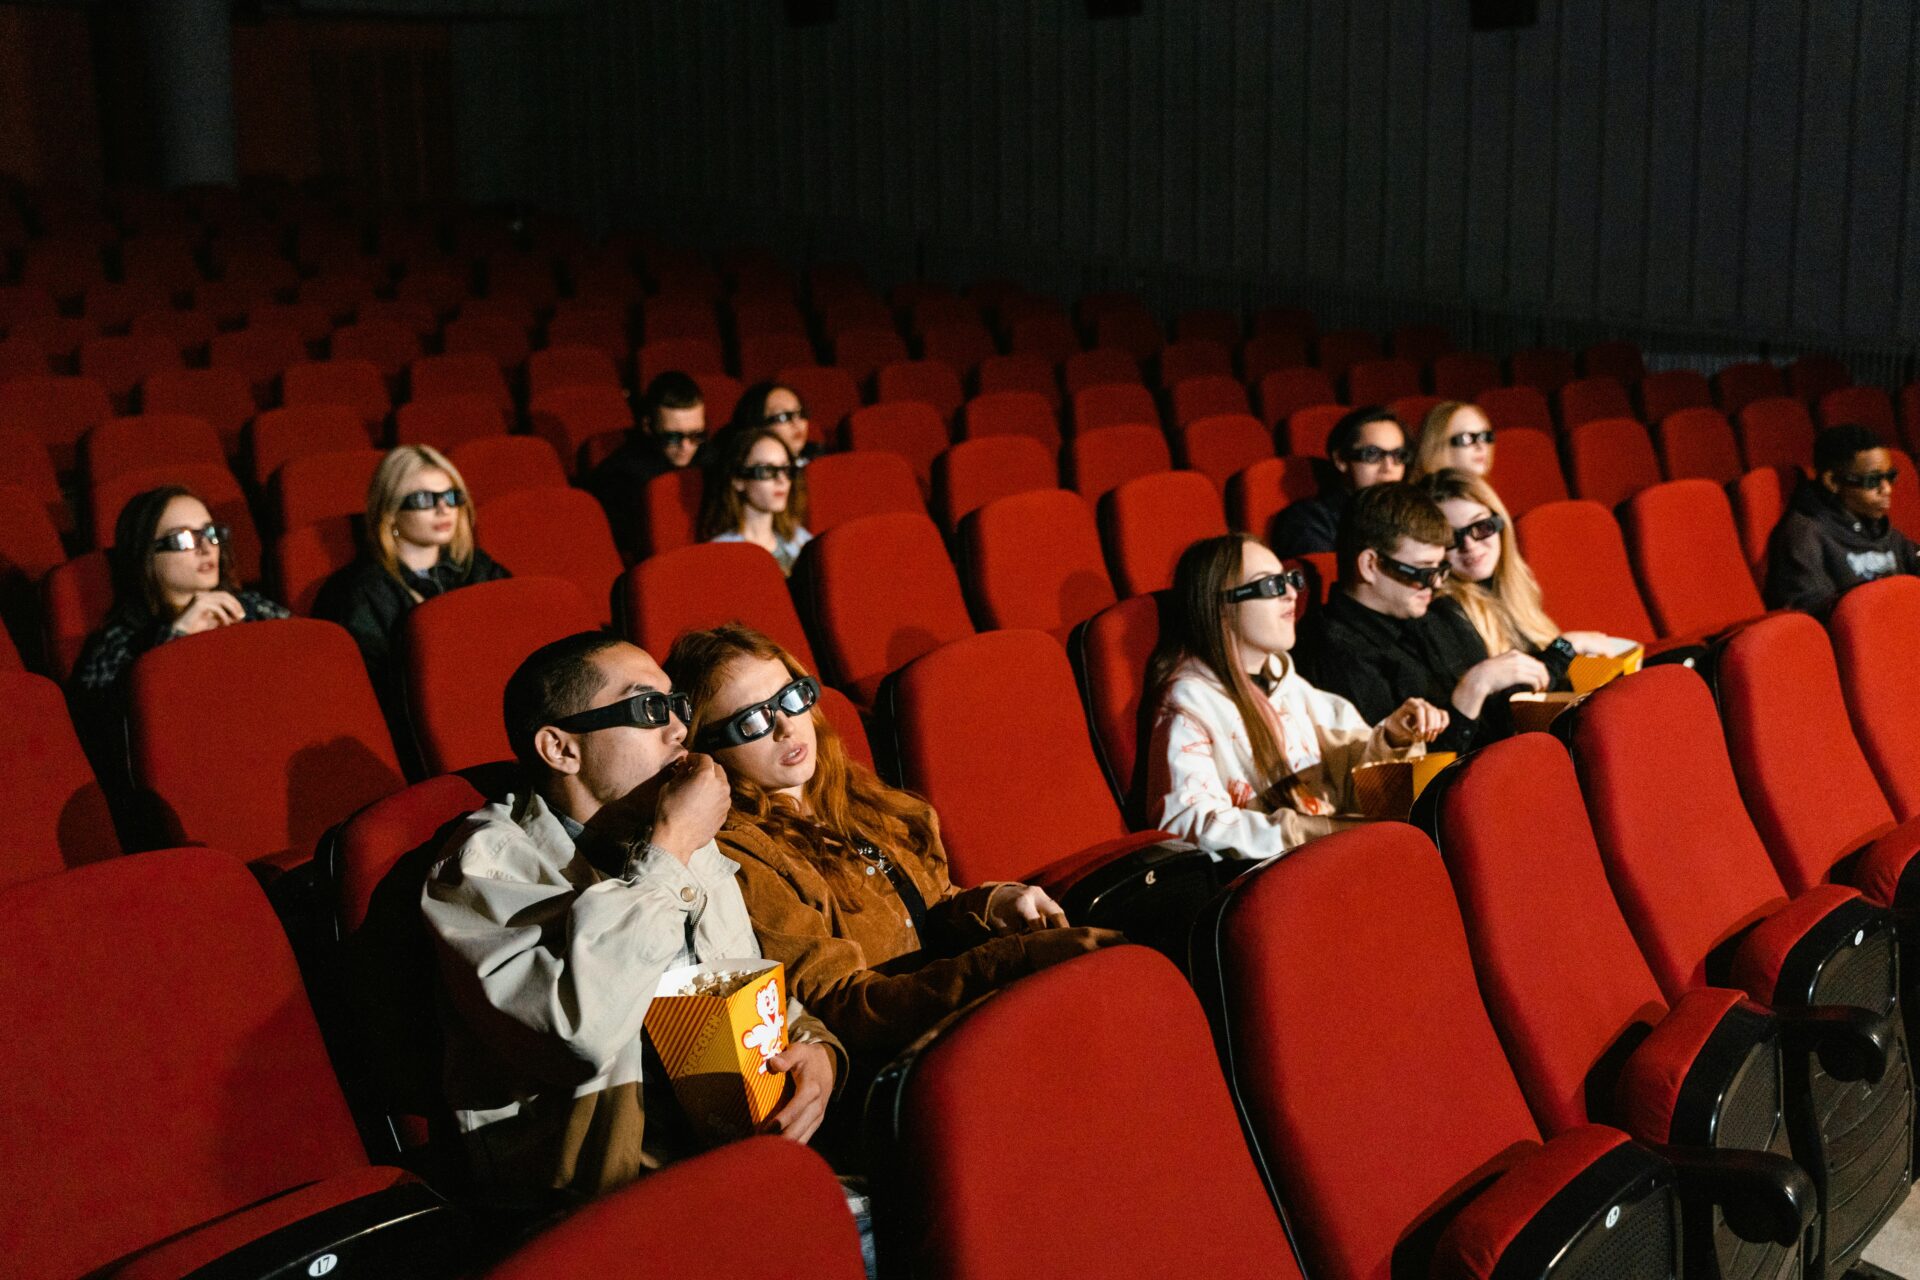 People in a movie theater wearing 3D glasses watching a film